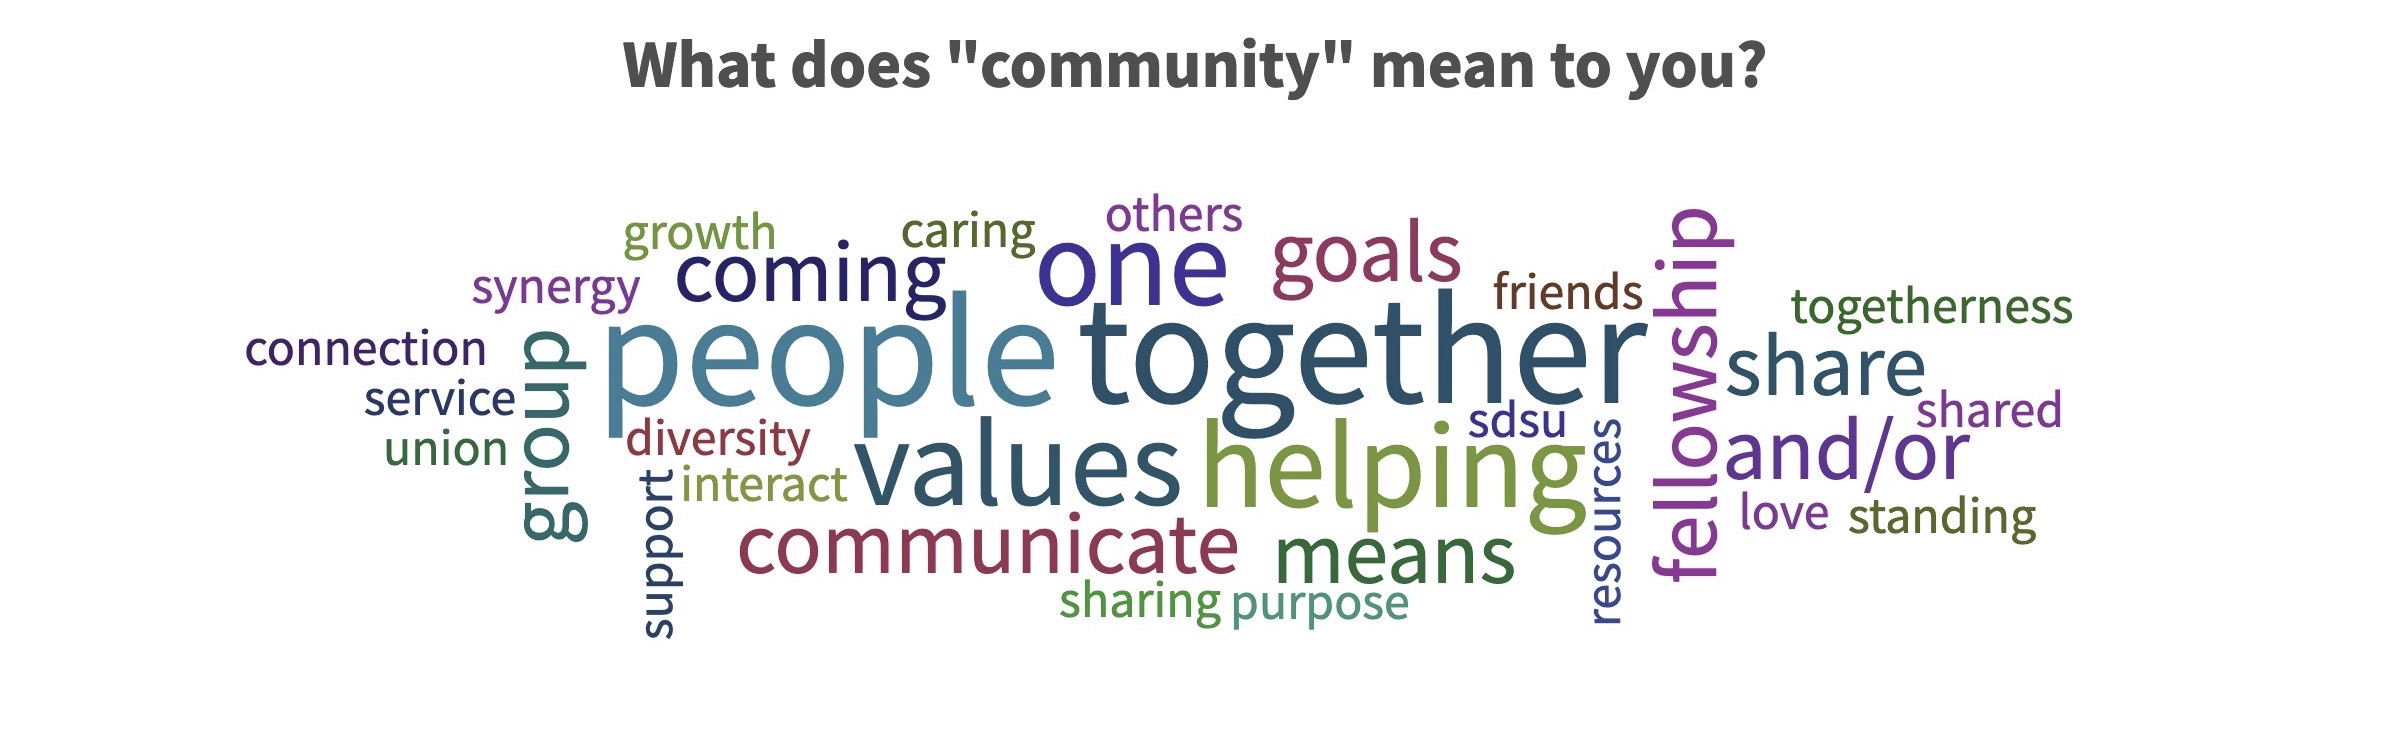 wordcloud - what does community mean to you? Growth, synergy, connection, values, fellowship, diversity,helping, etc.